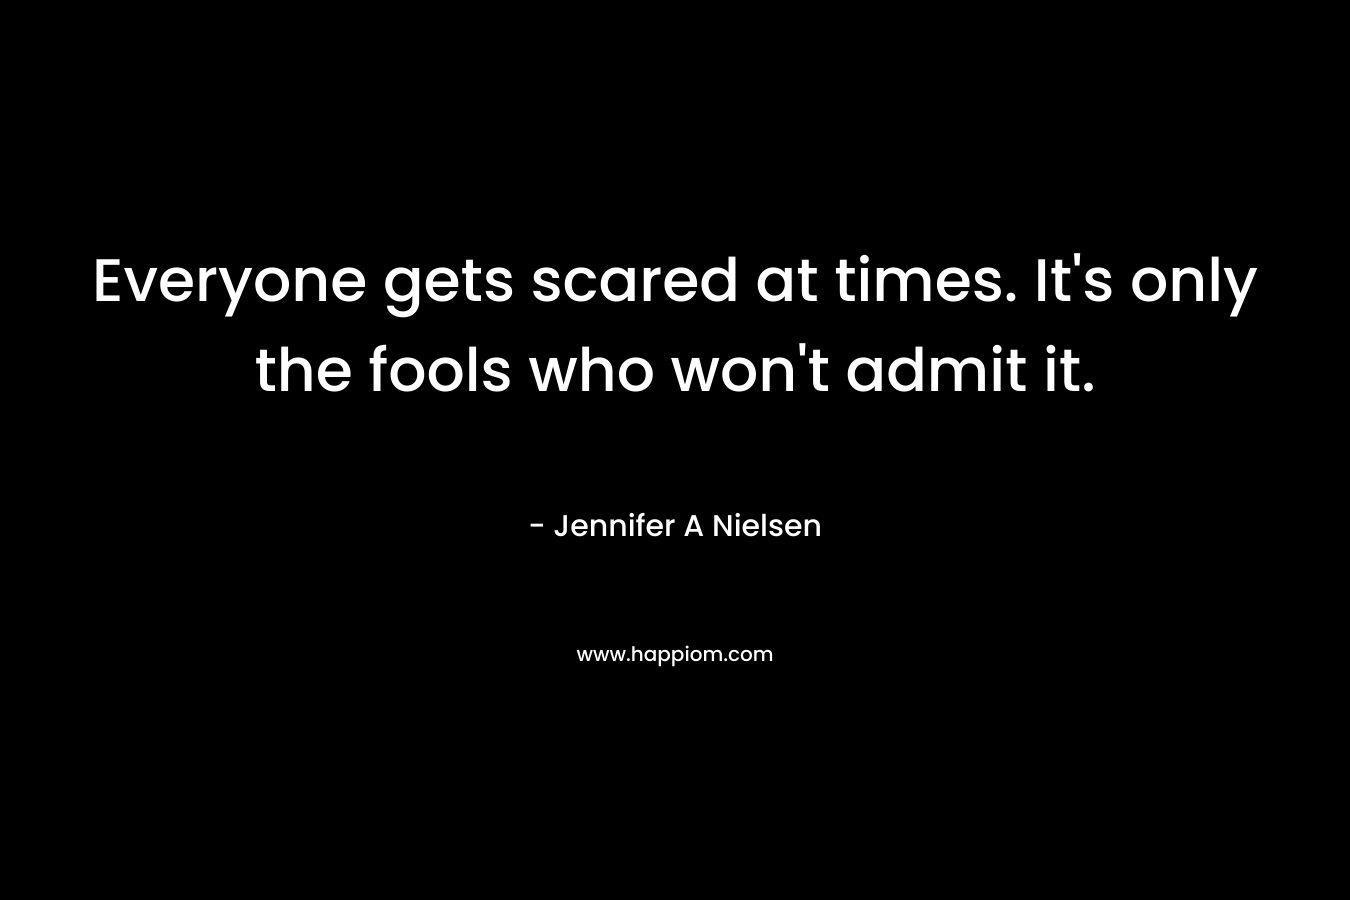 Everyone gets scared at times. It’s only the fools who won’t admit it. – Jennifer A Nielsen